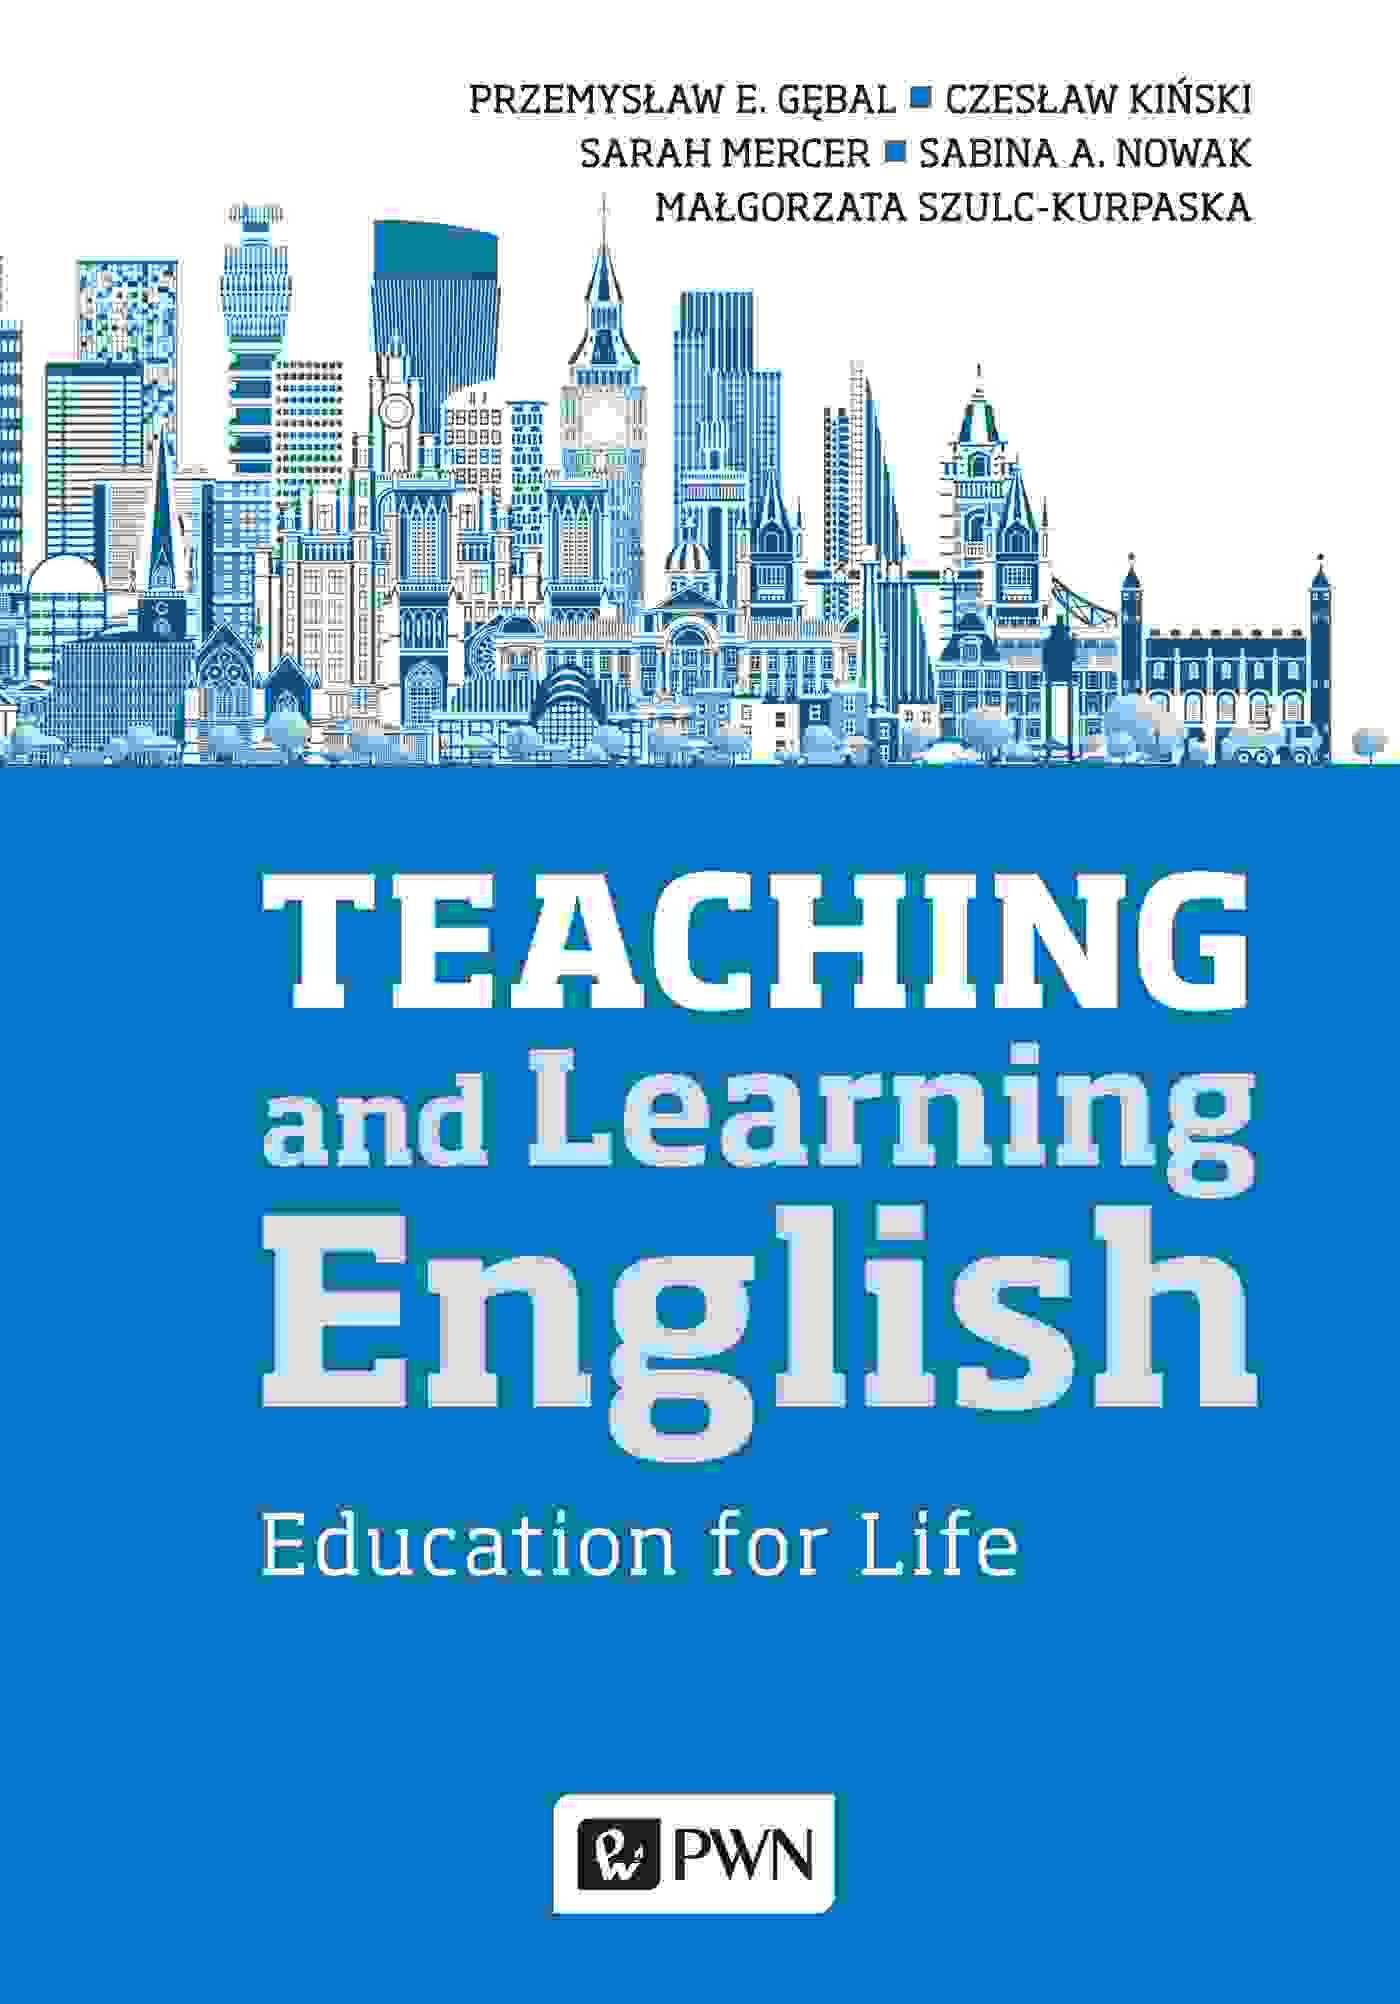 Teaching and Learning English. Education for Life